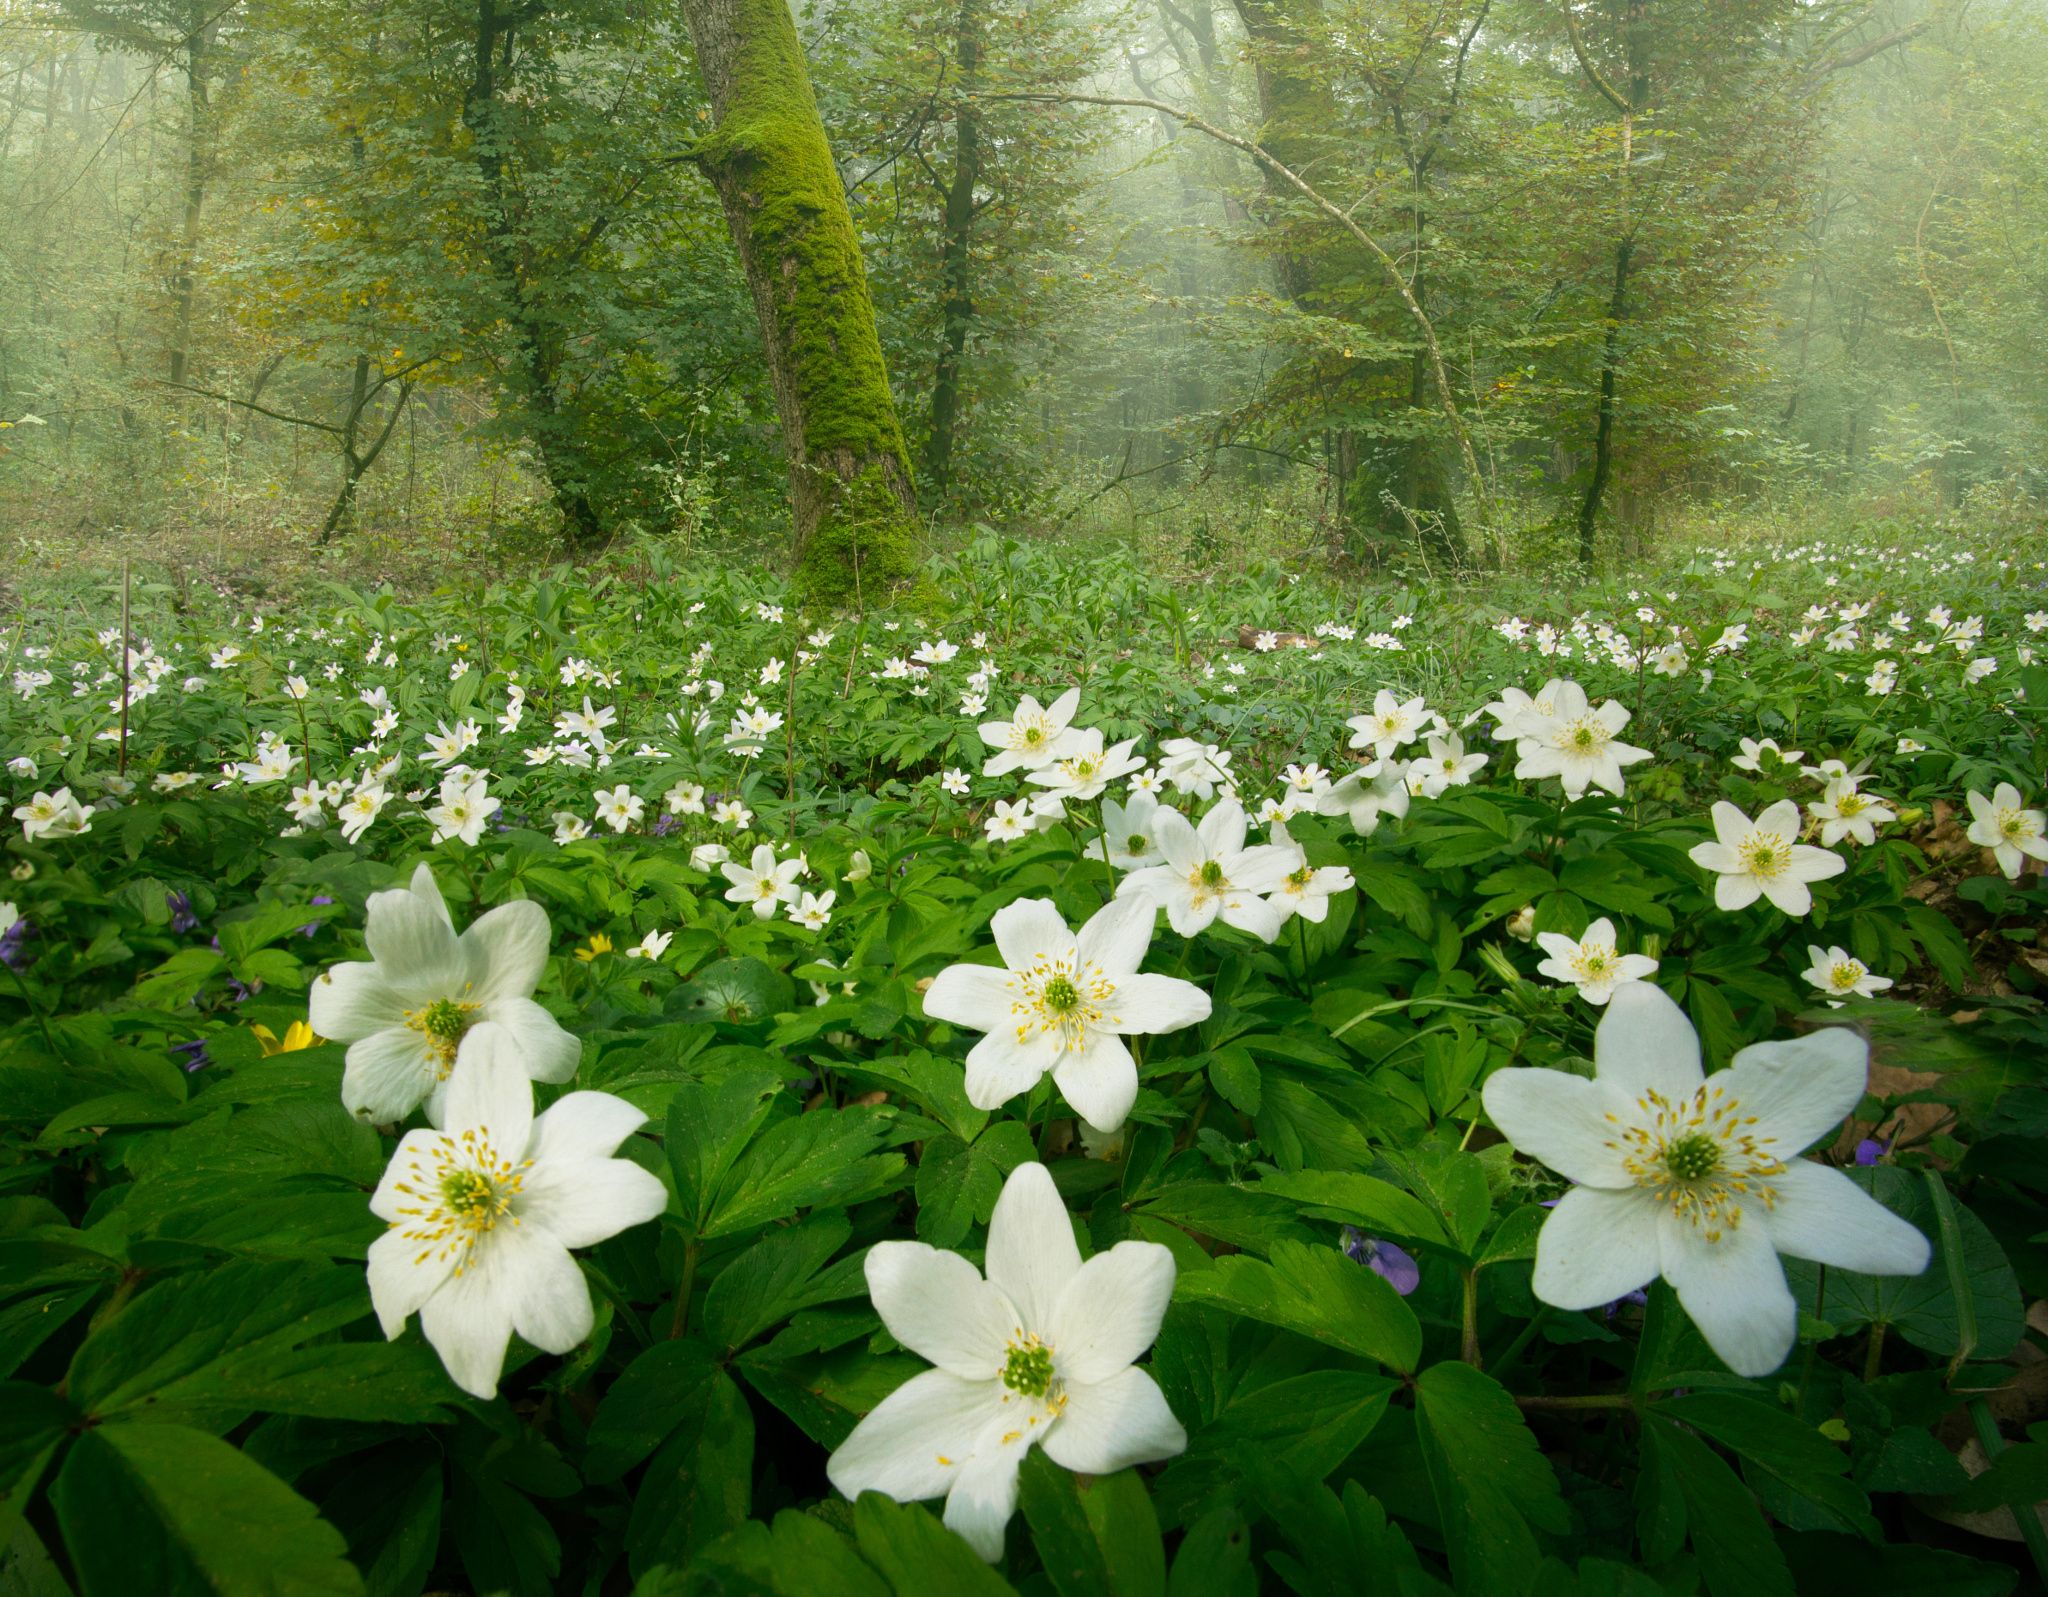 The joy of life - finally the forest is blooming with life... | WILD ...